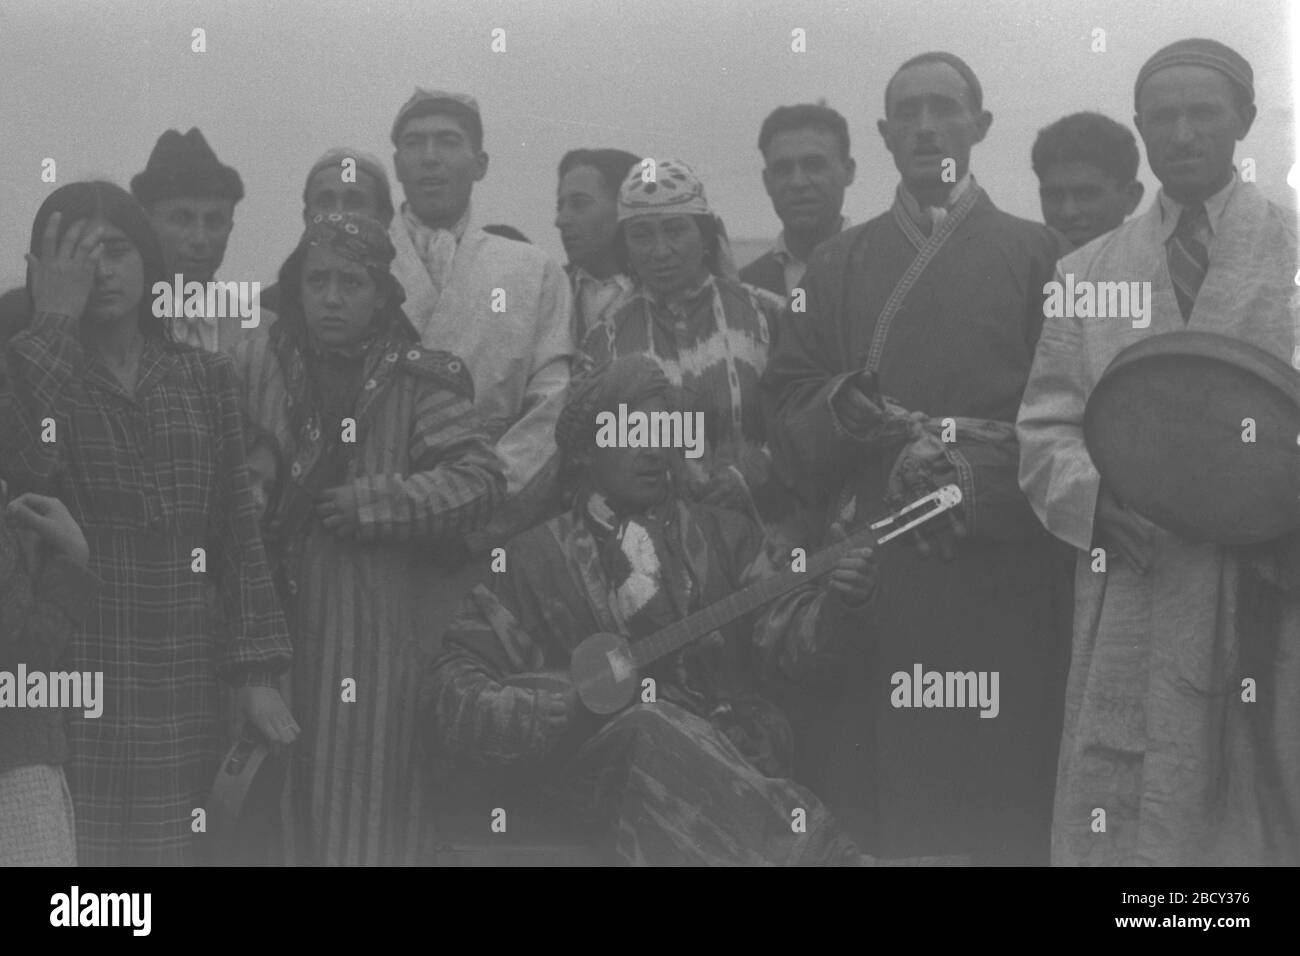 A Group Of Immigrants High Resolution Stock Photography And Images Alamy